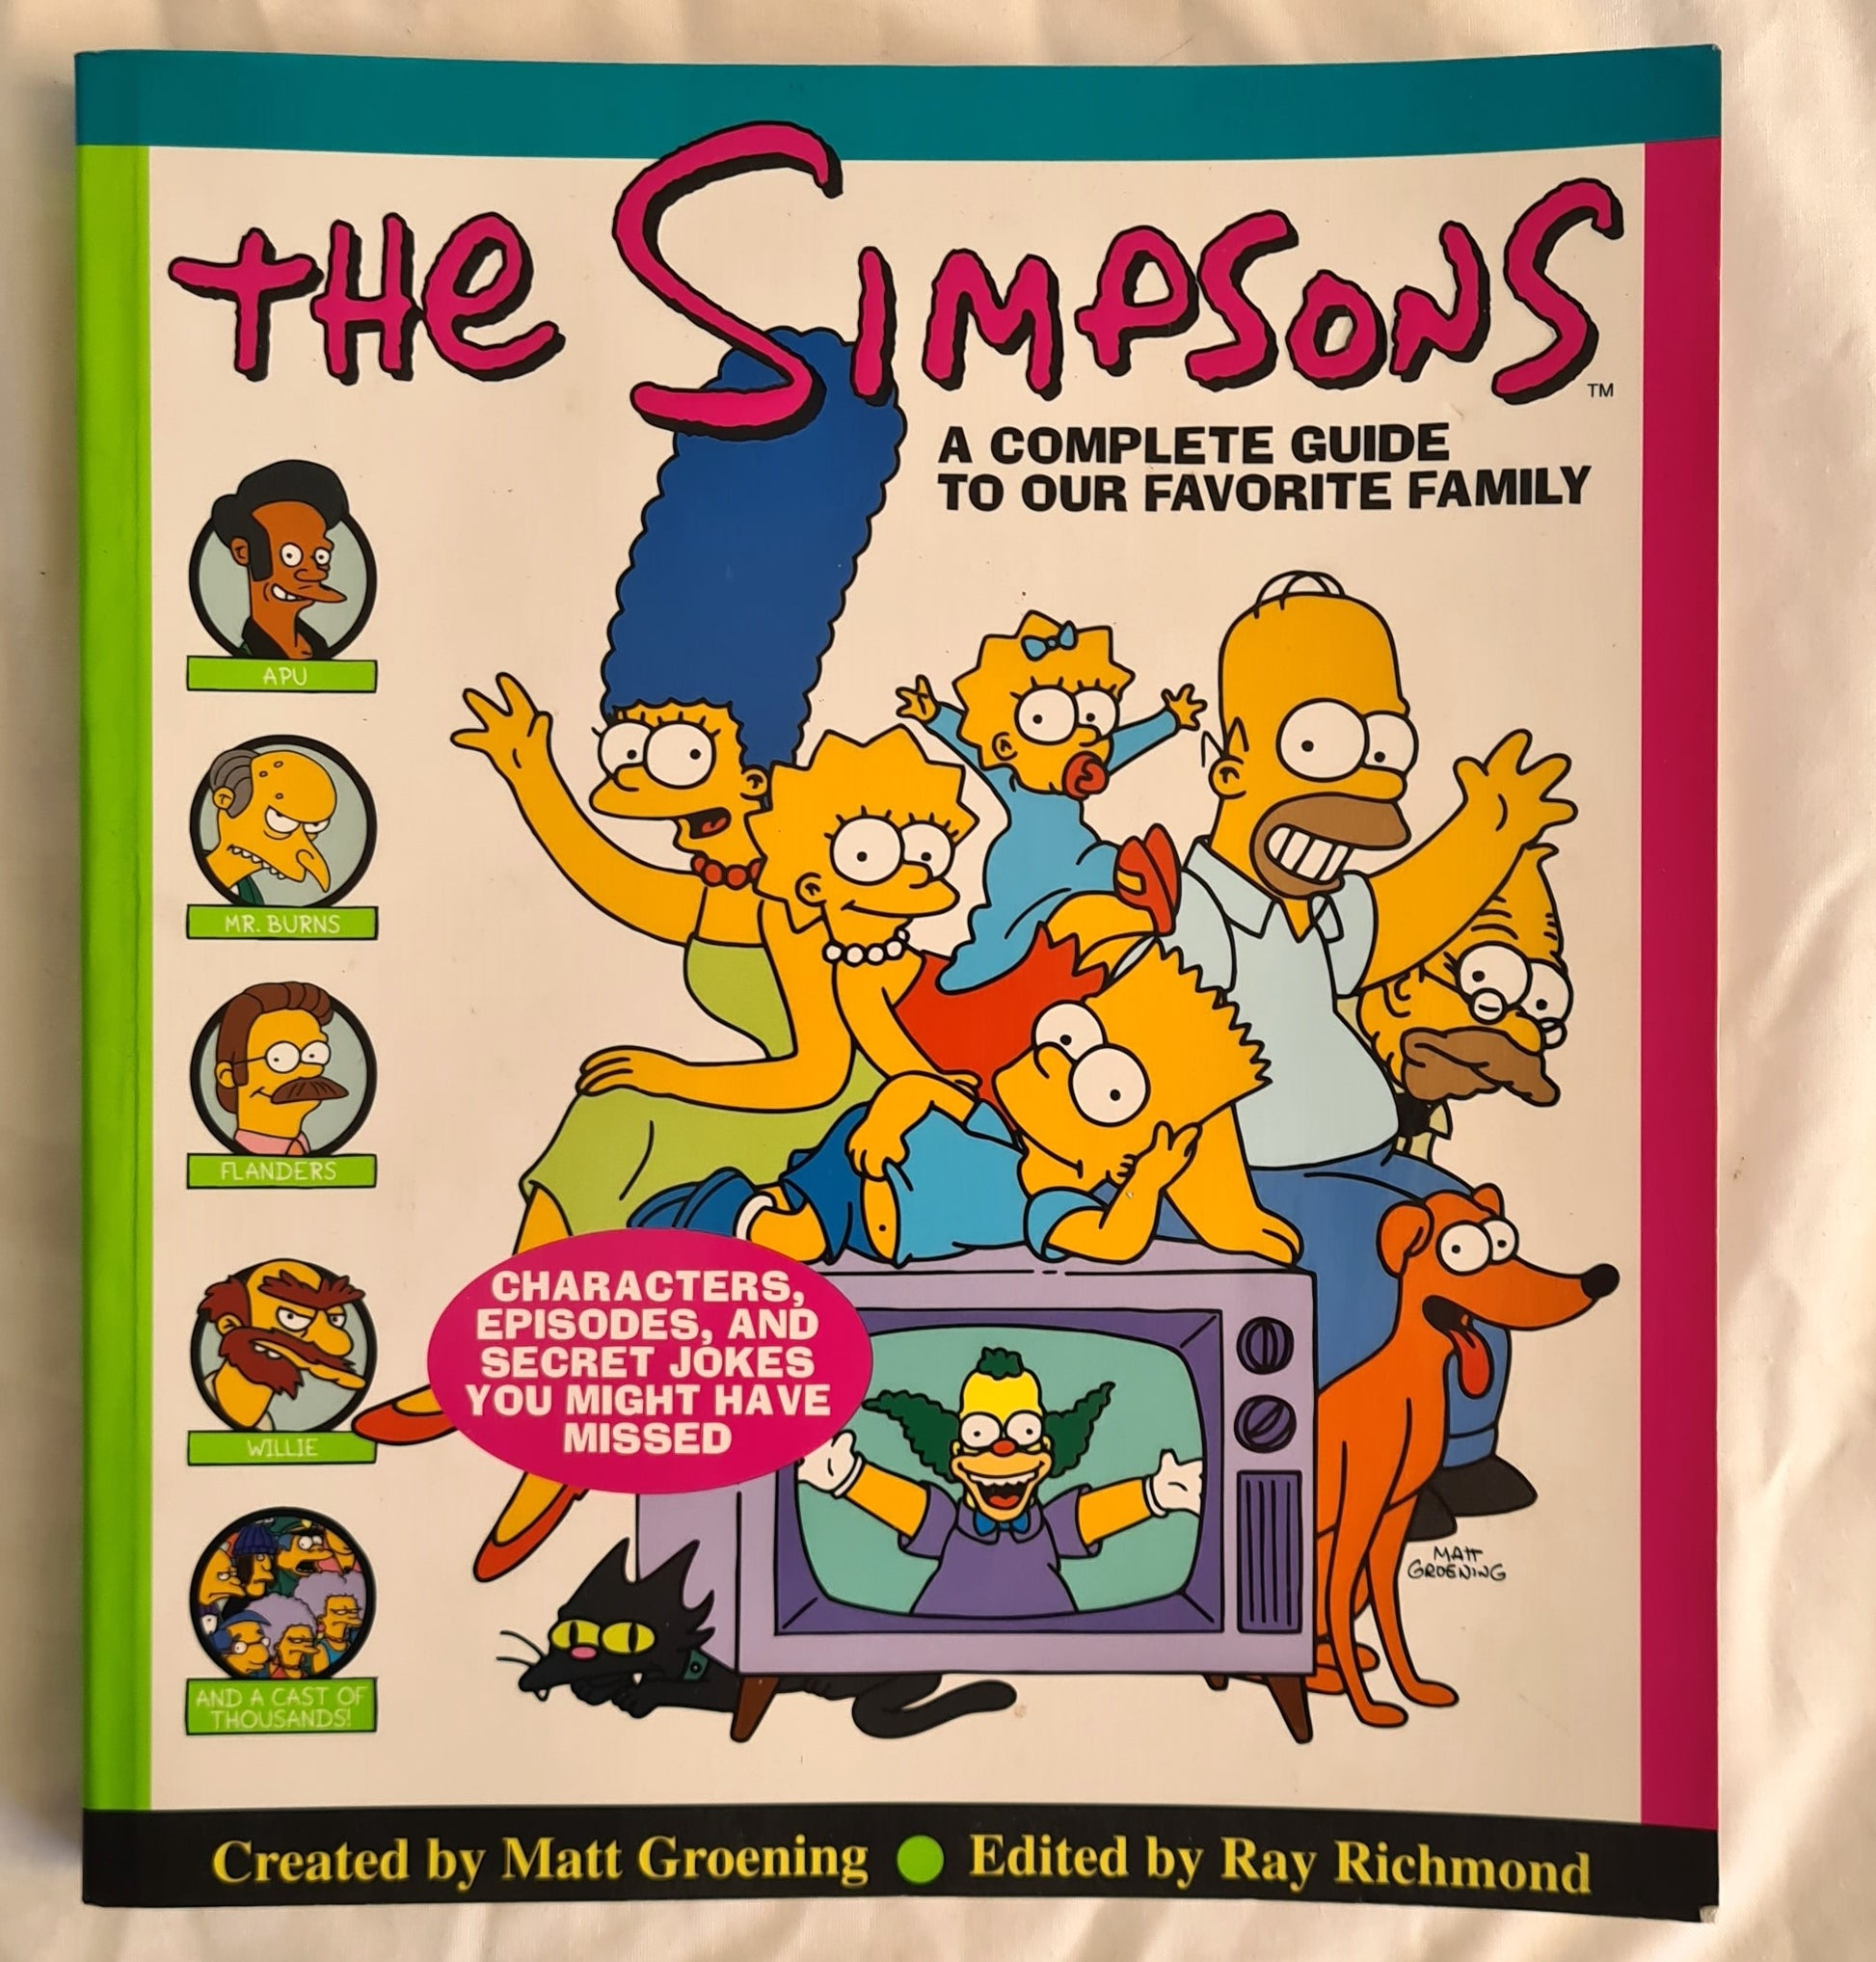 The Simpsons  A Complete Guide to Our Favorite Family  Created by Matt Groening  Edited by Ray Richmond and Antonia Coffman